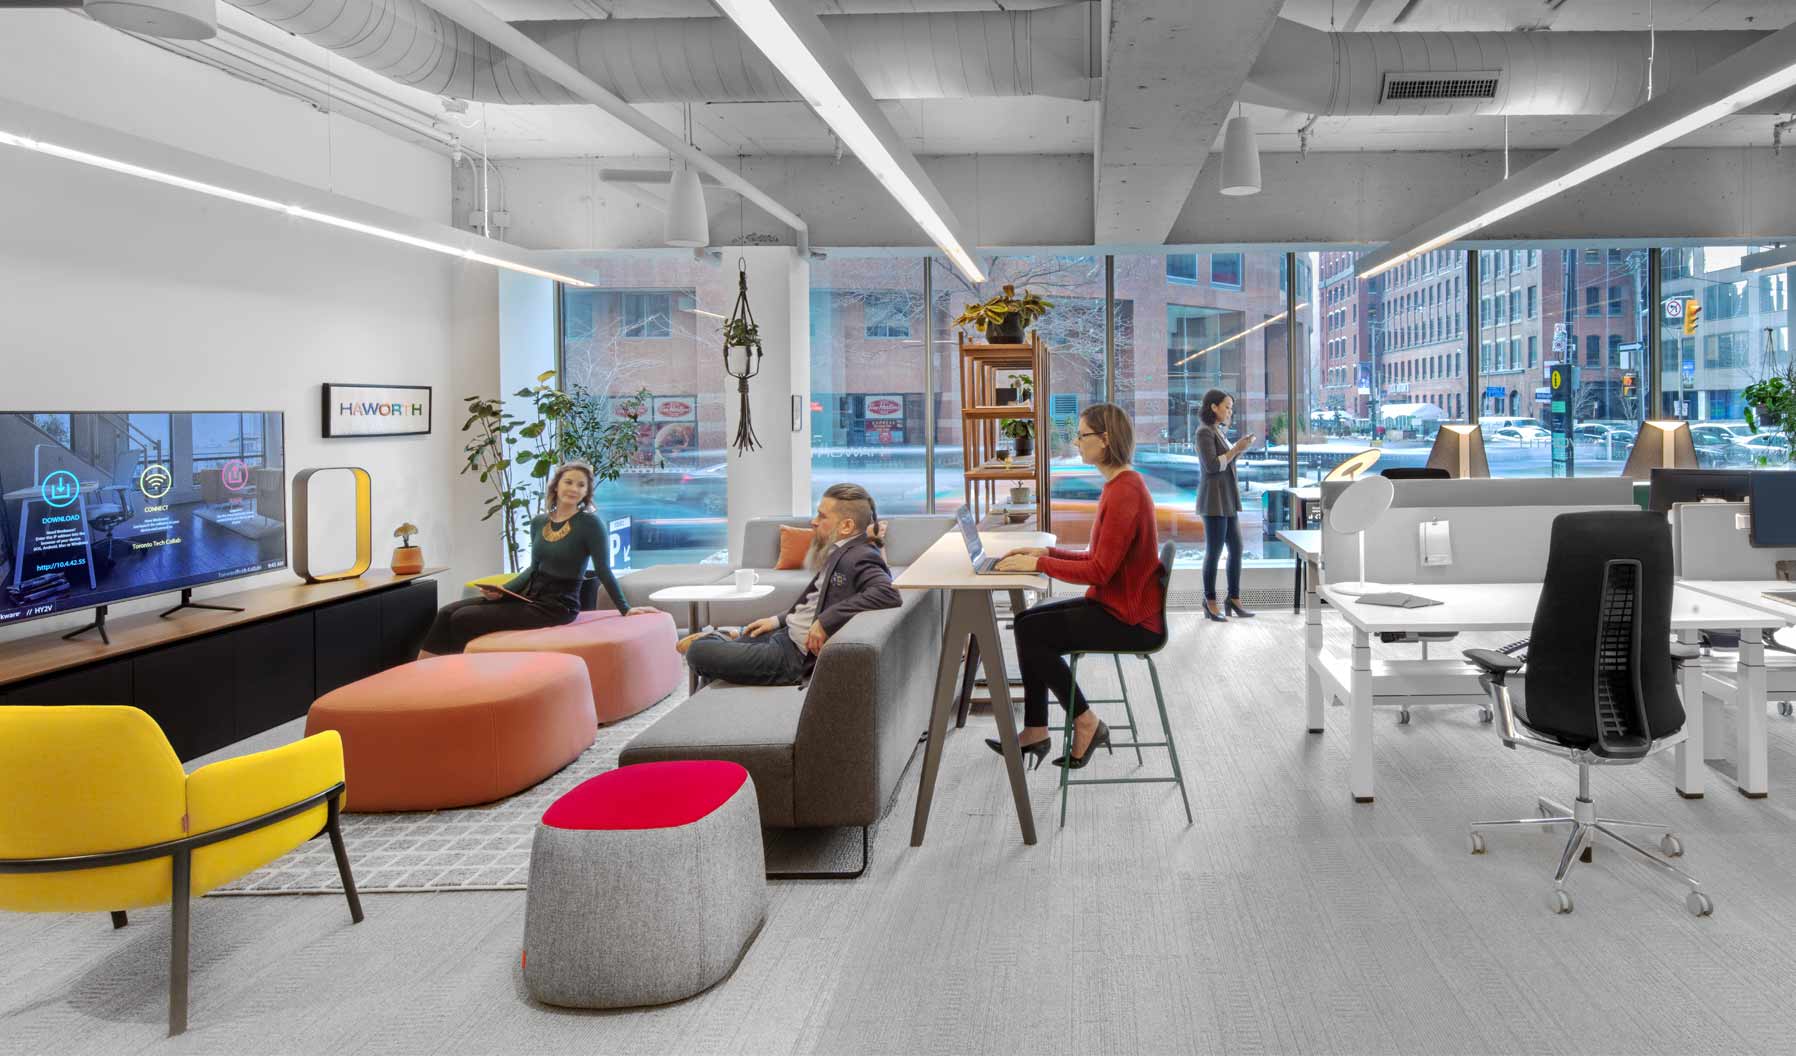 An open space with comfortable seating to encourage interaction and collaboration, a lounge supports relaxed seated postures and offers visual comfort. A variety of elements—lighting, rugs, and residentialmaterials—contribute to ambience.